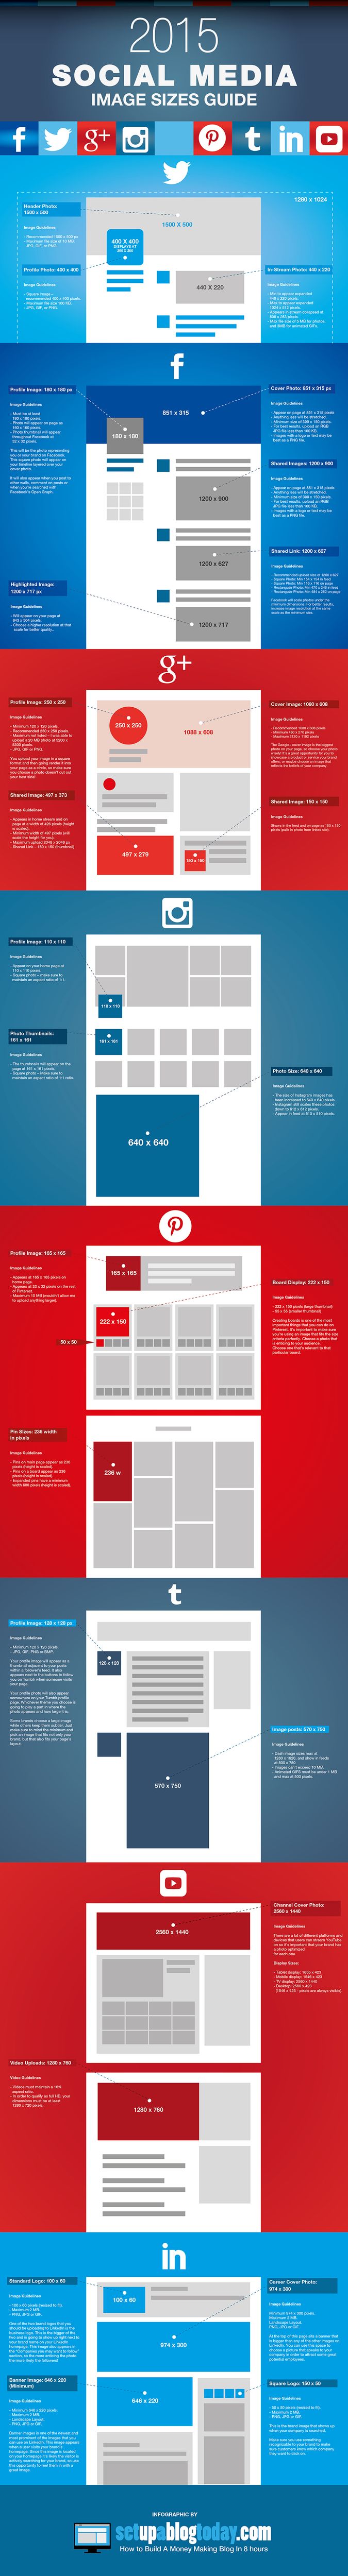 Infographic of dimensions for each social media image.